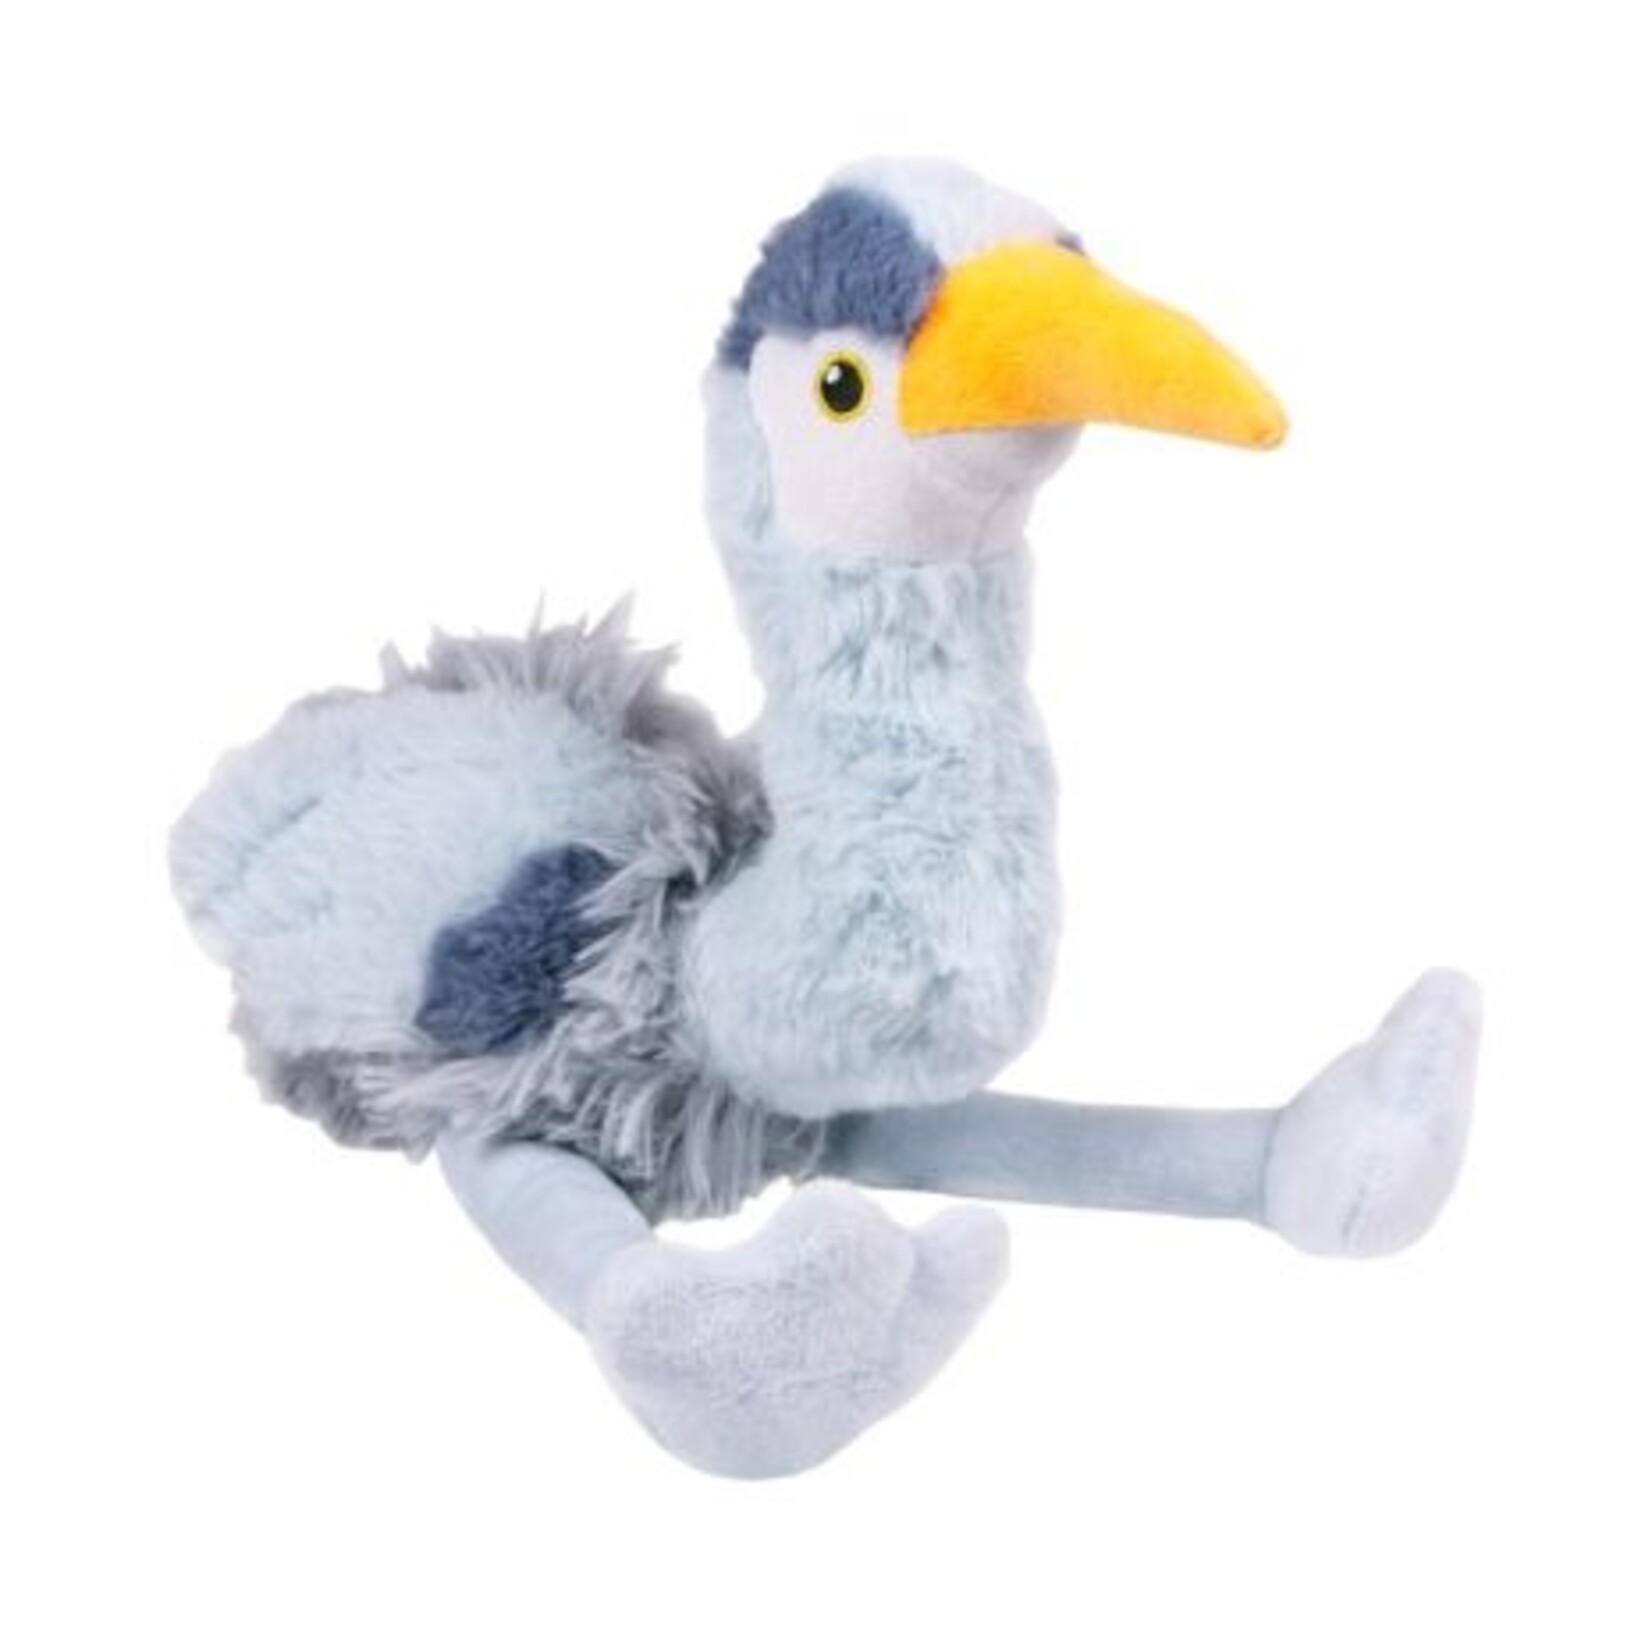 Tall Tails TALL TAILS Plush Heron Dog Toy